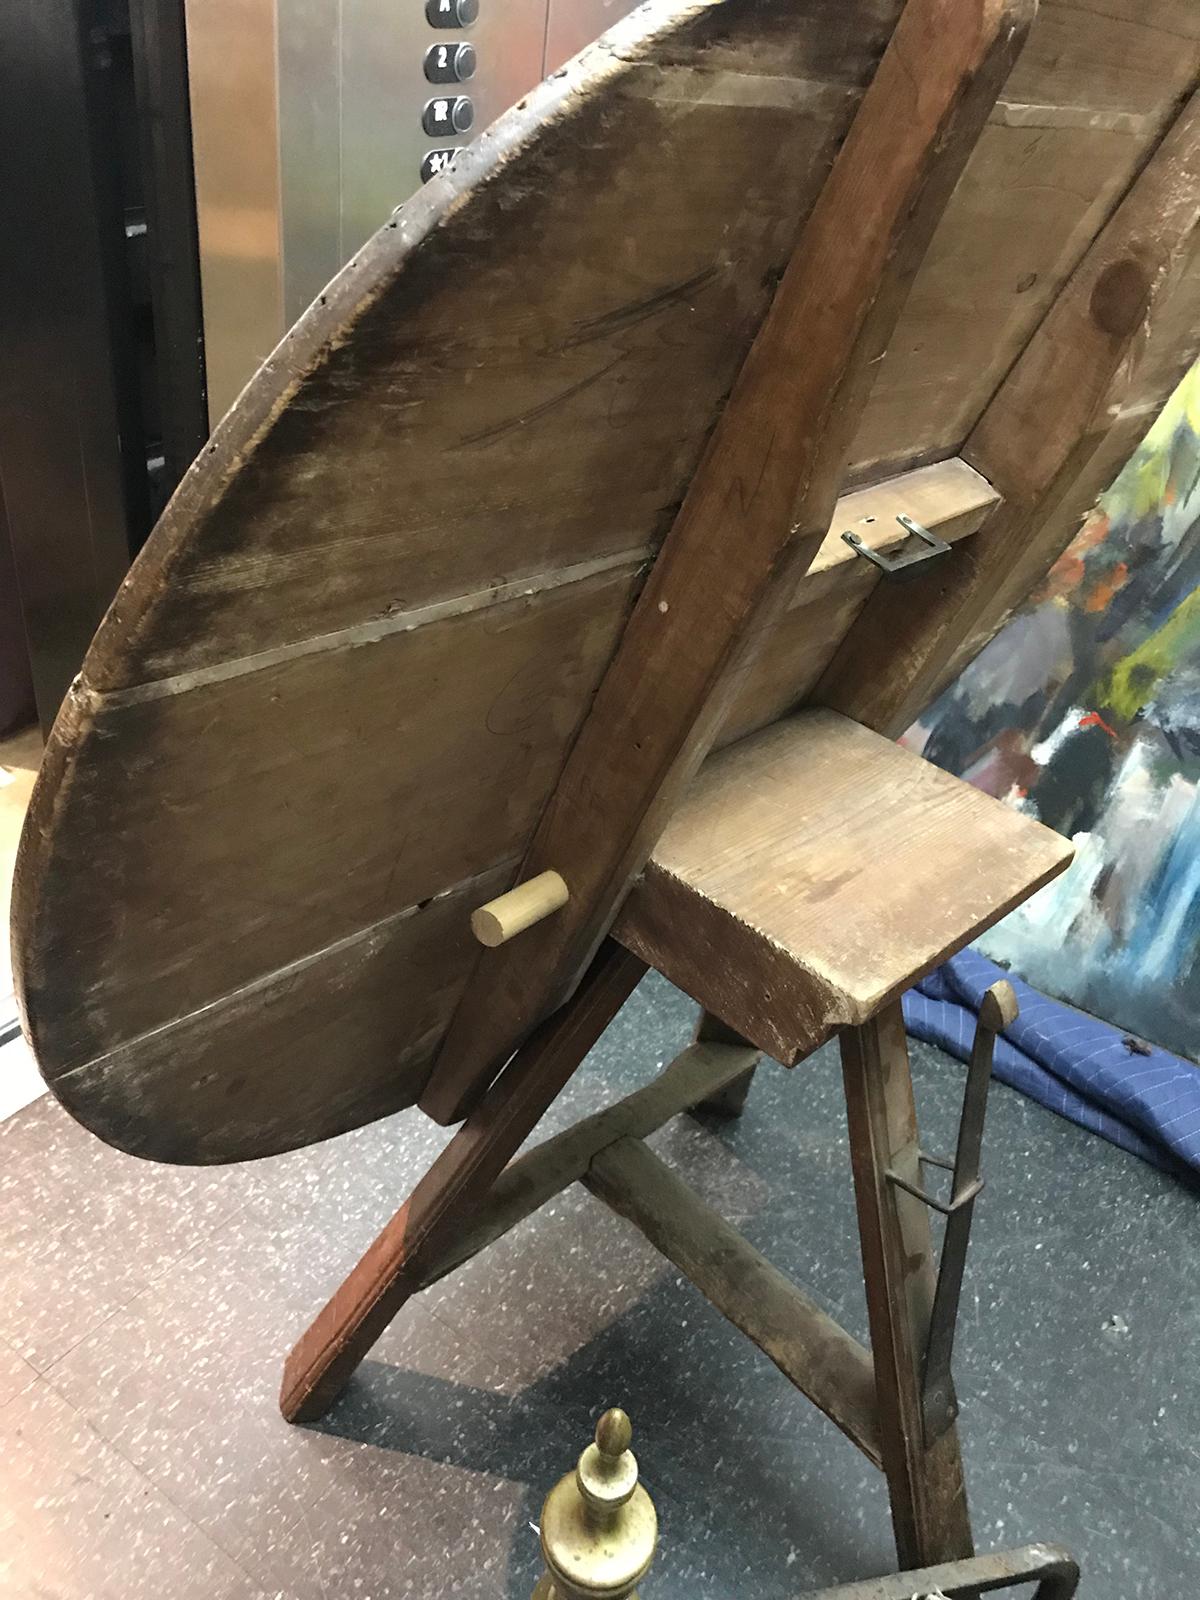 19th-20th century old round tilt-top work table with great patina.